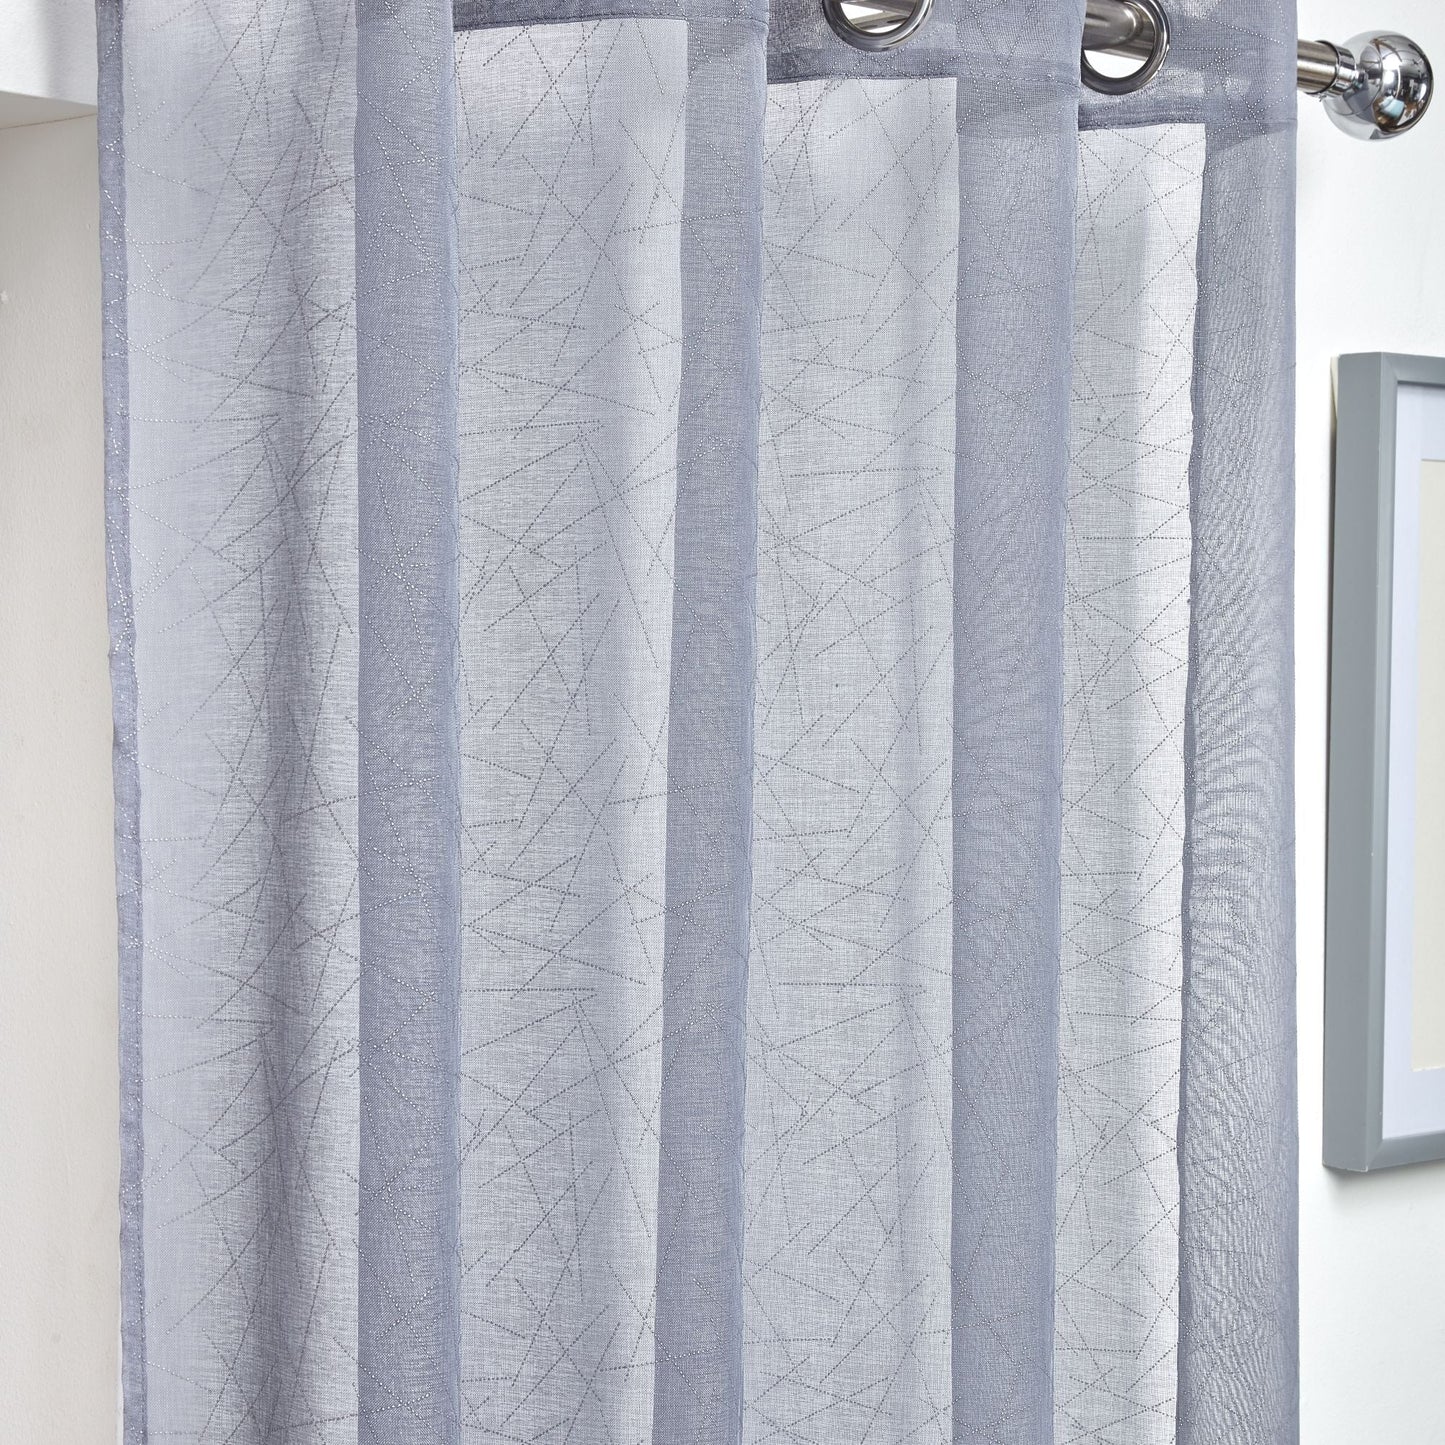 Silver Aries Eyelet Voile Curtain Panel